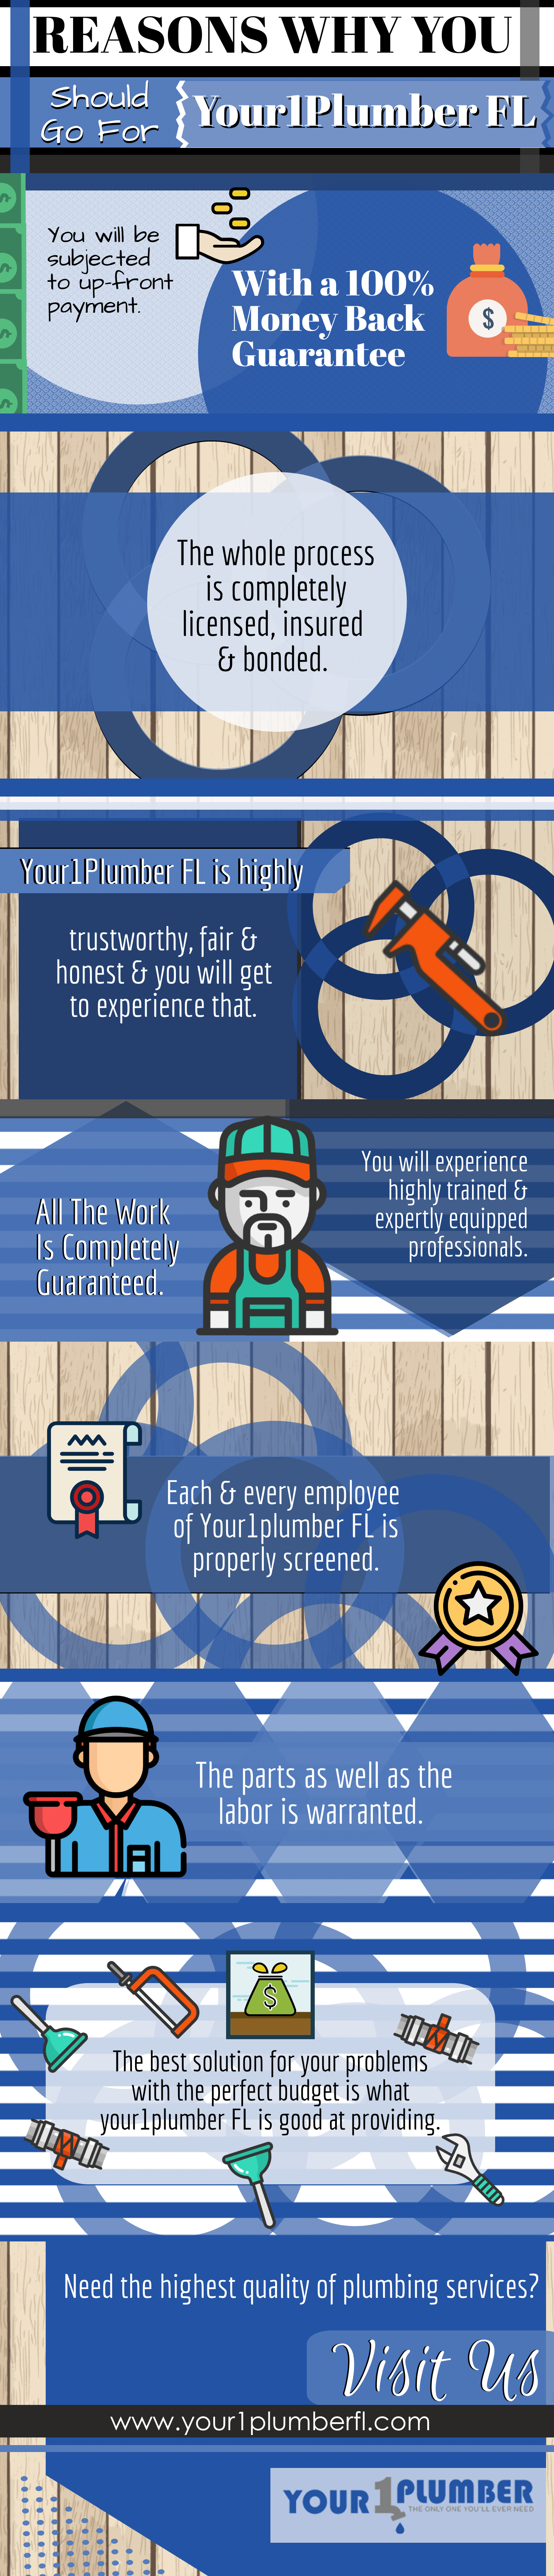 Reasons Why You Should Go For Your 1 Plumber FL